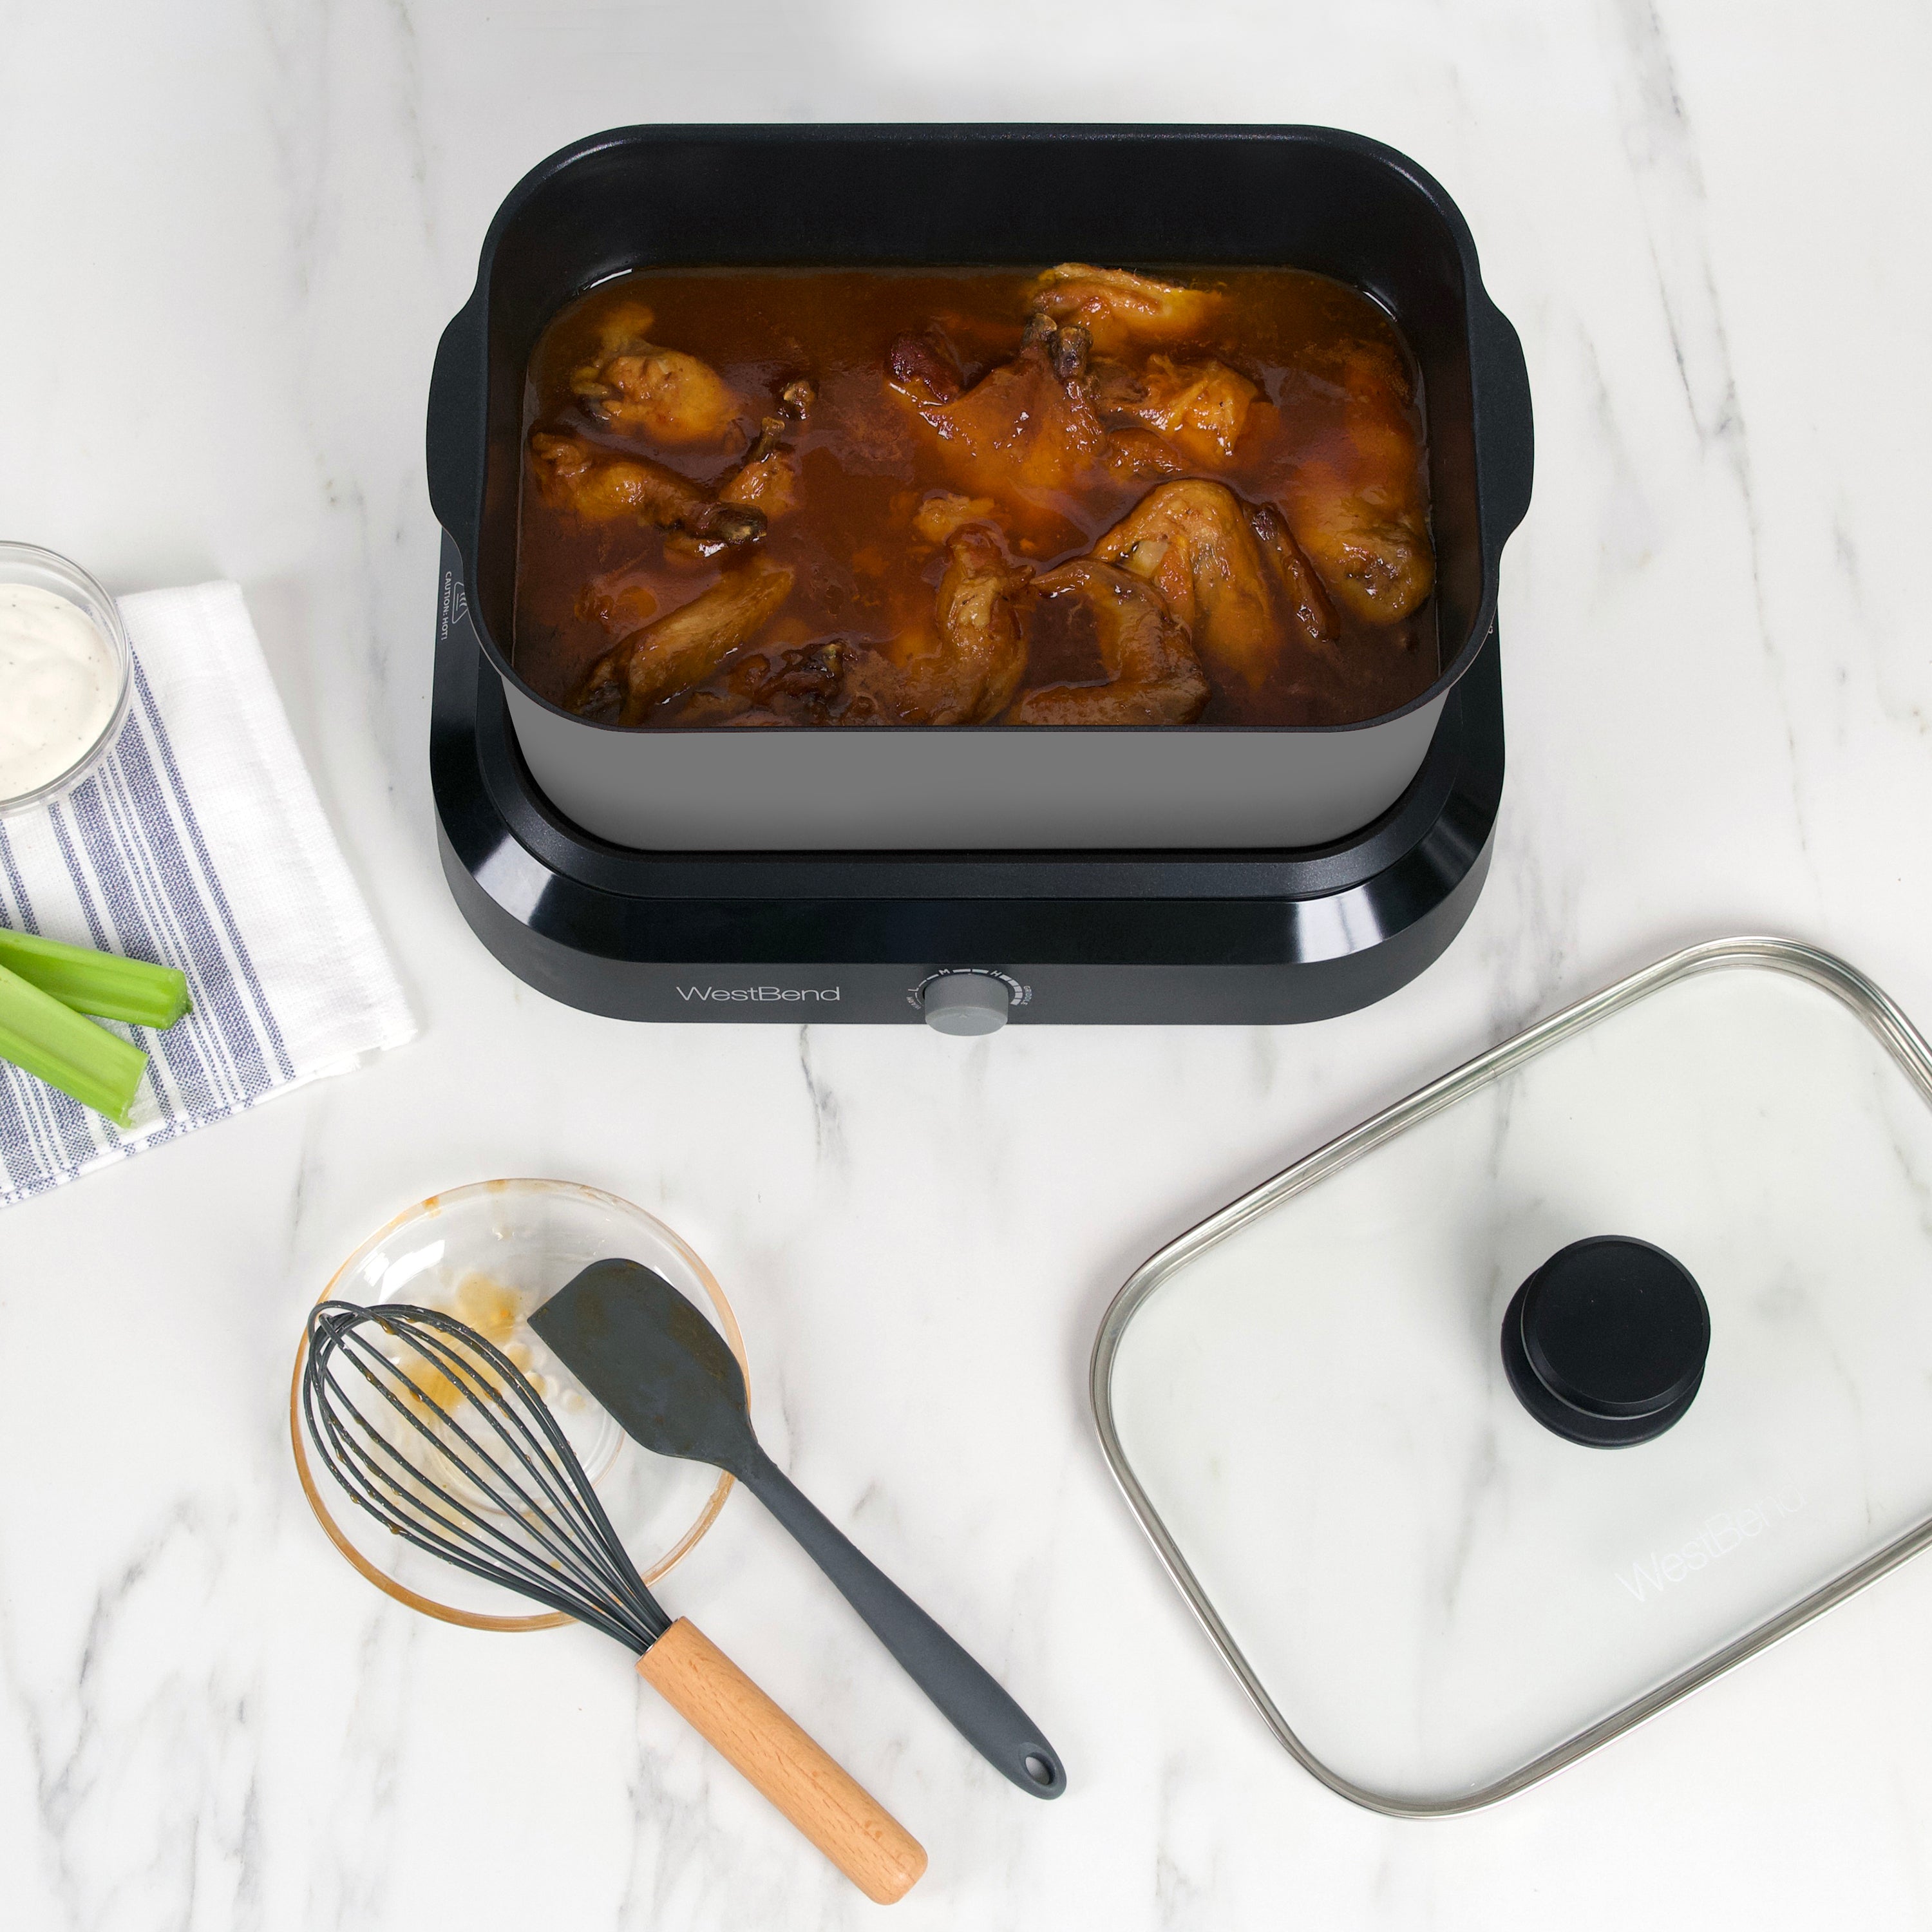 West Bend Slow Cooker 6-Qt with Travel Lid, Griddle & Thermal Carrying Case  Only $42.49 (Reg. $70) on